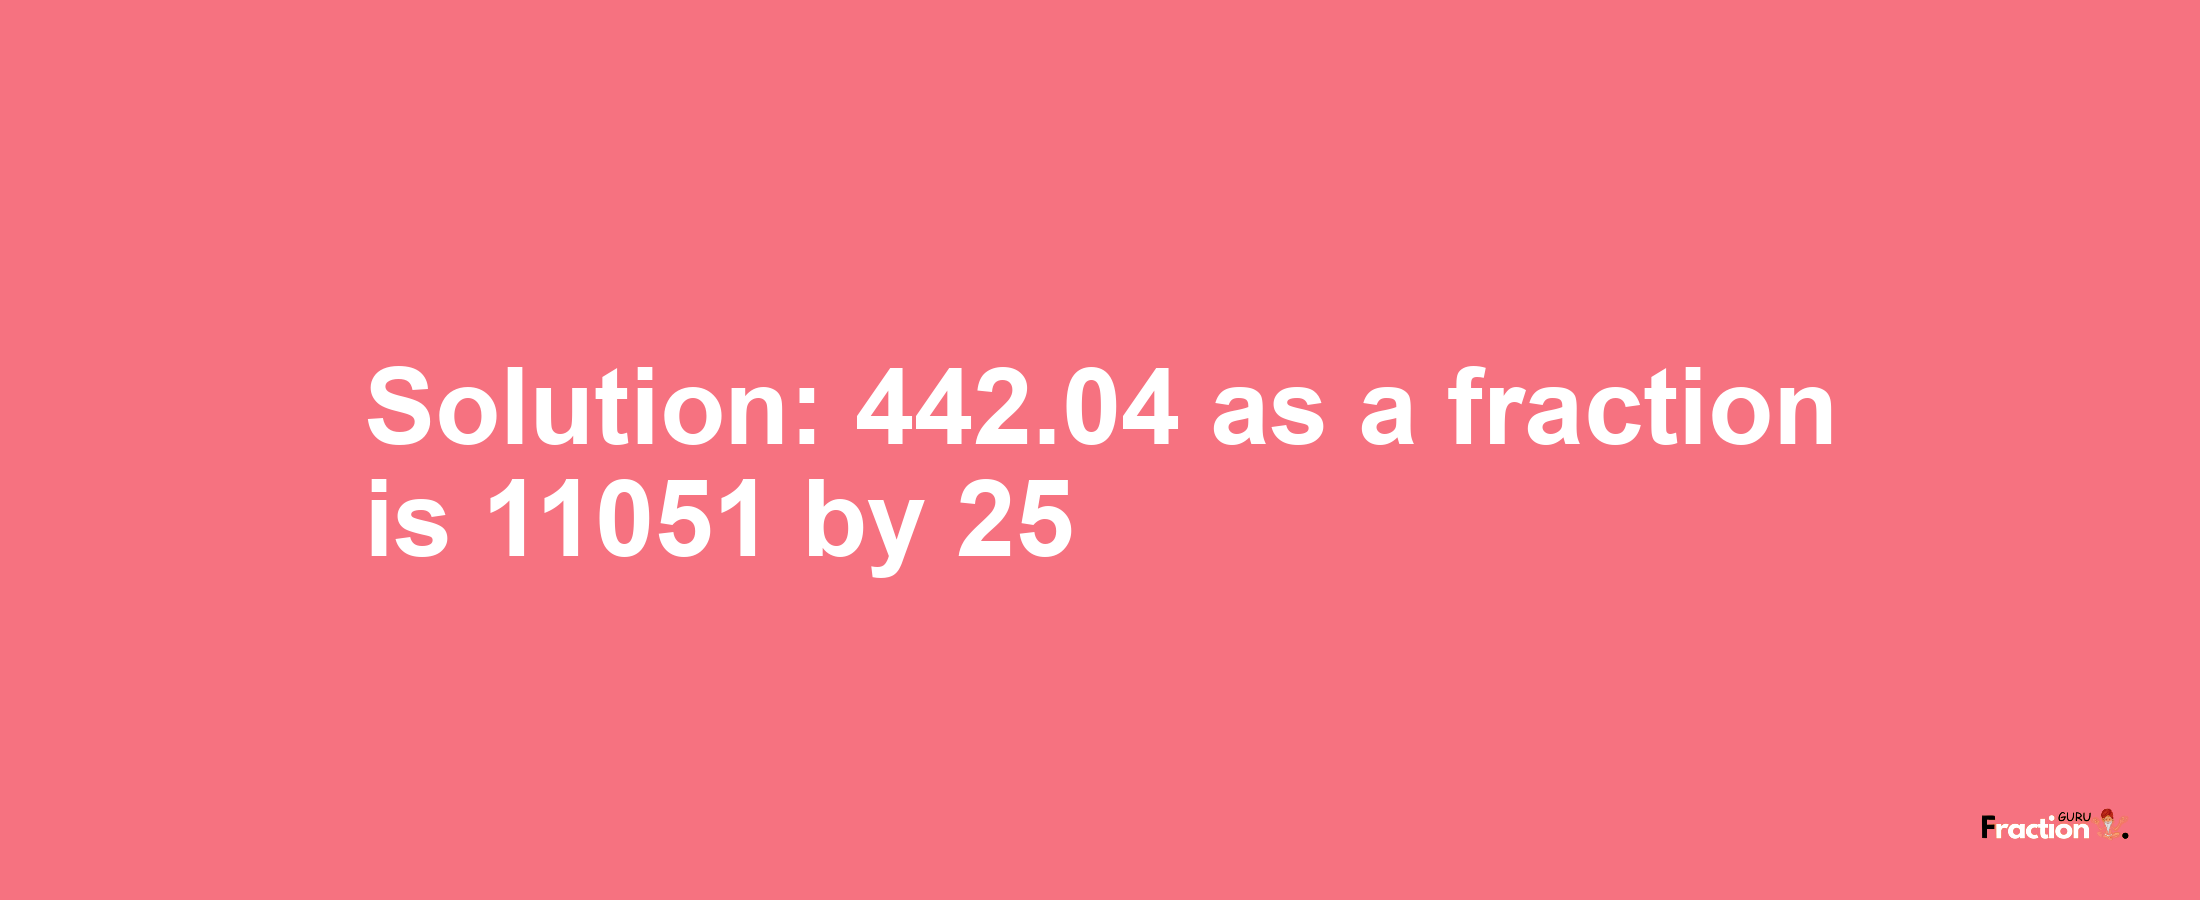 Solution:442.04 as a fraction is 11051/25